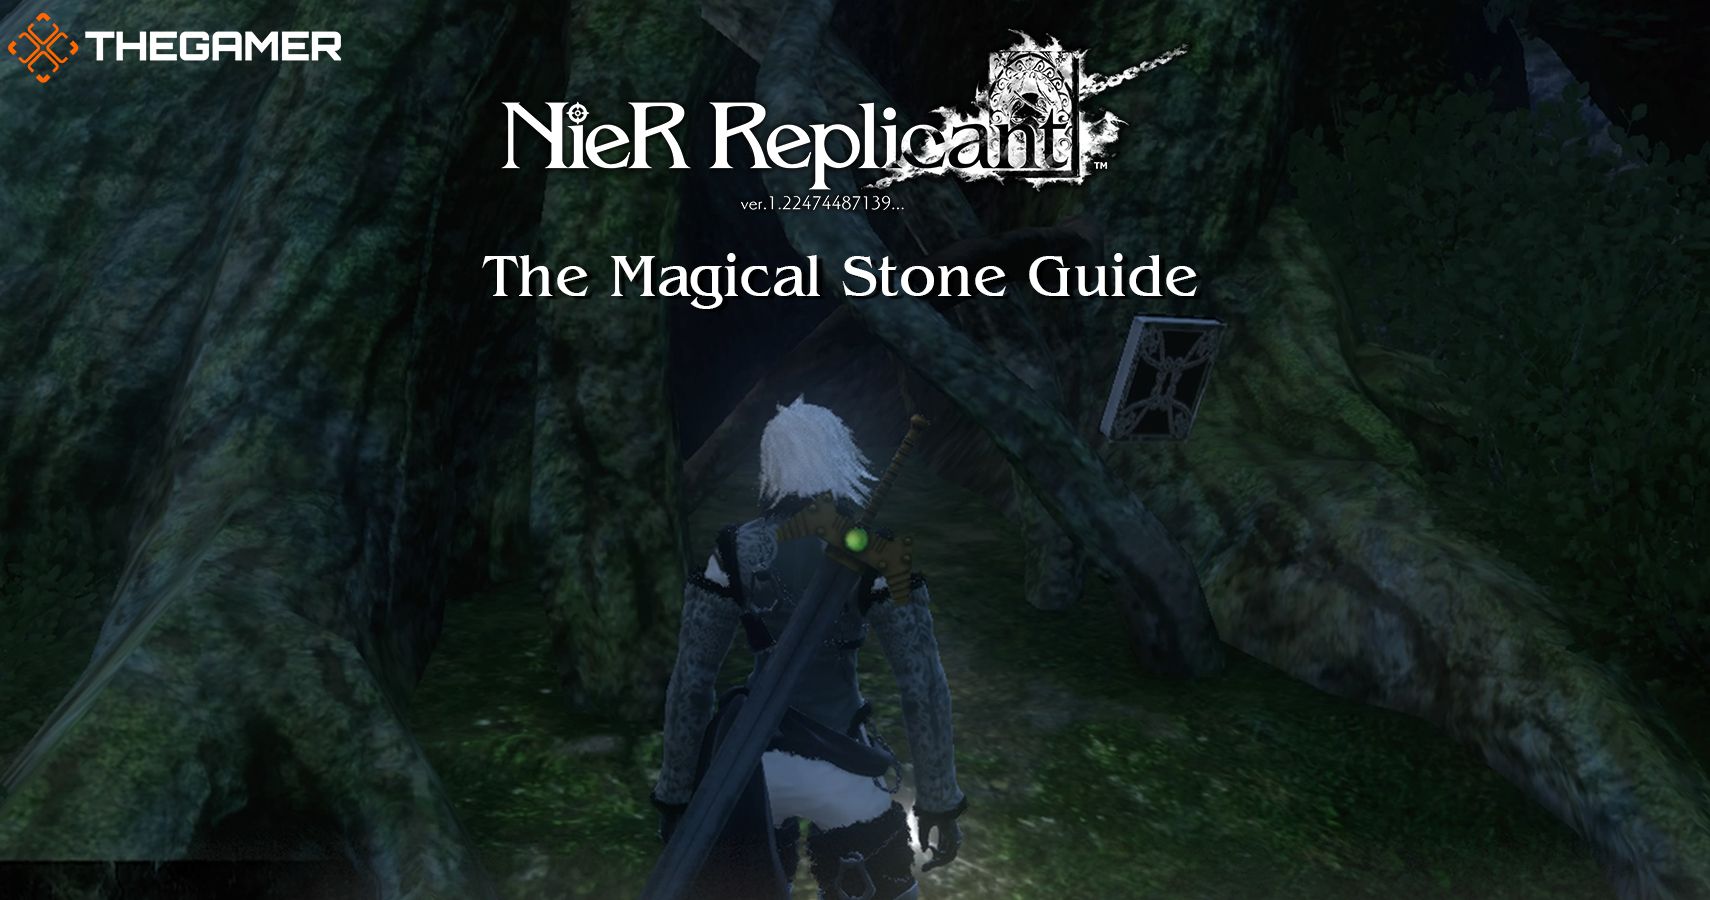 Nier Replicant The Magical Stone Quest Guide